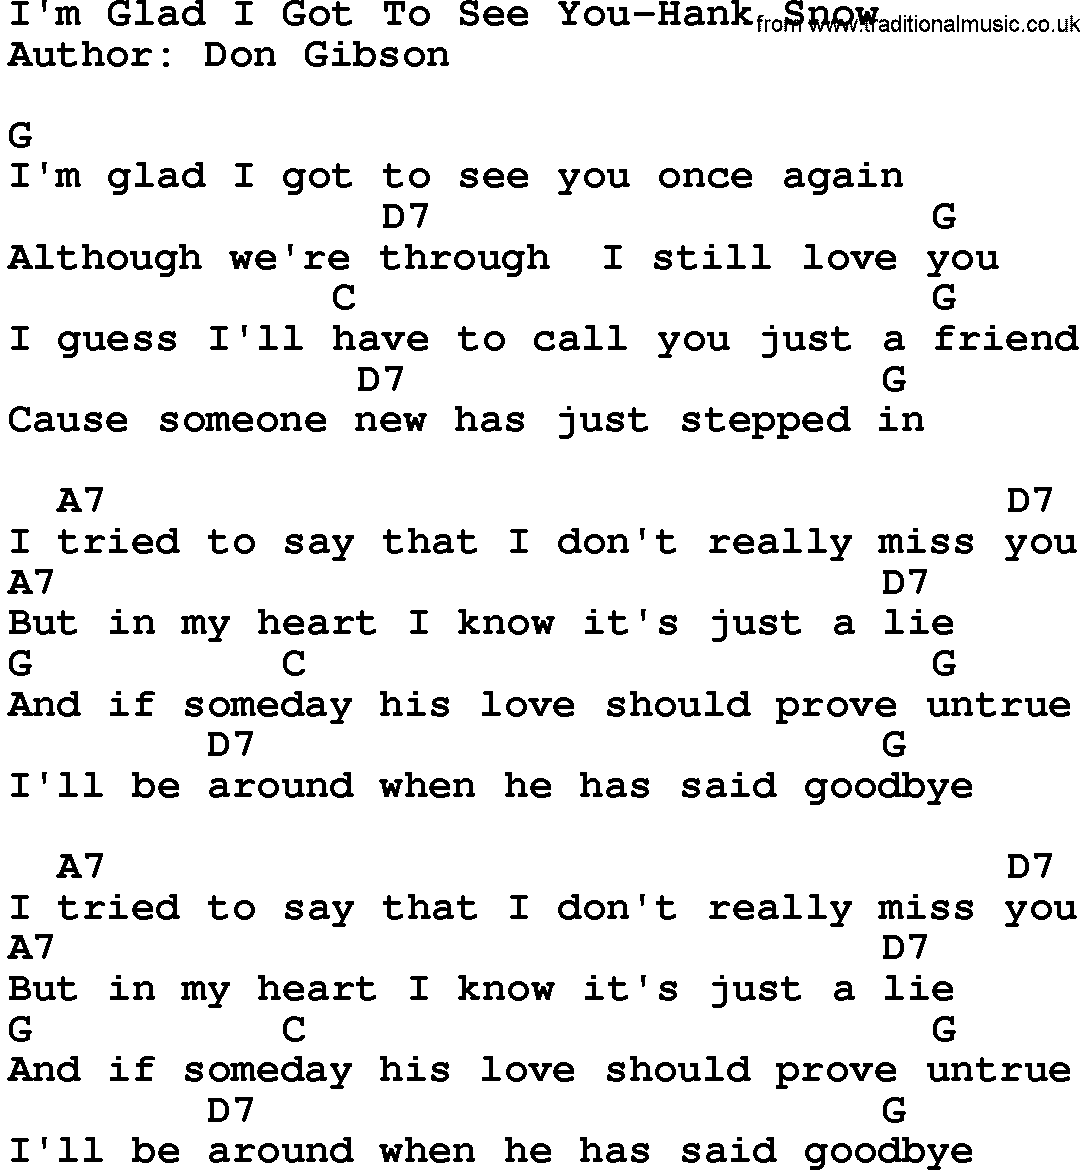 Country music song: I'm Glad I Got To See You-Hank Snow lyrics and chords